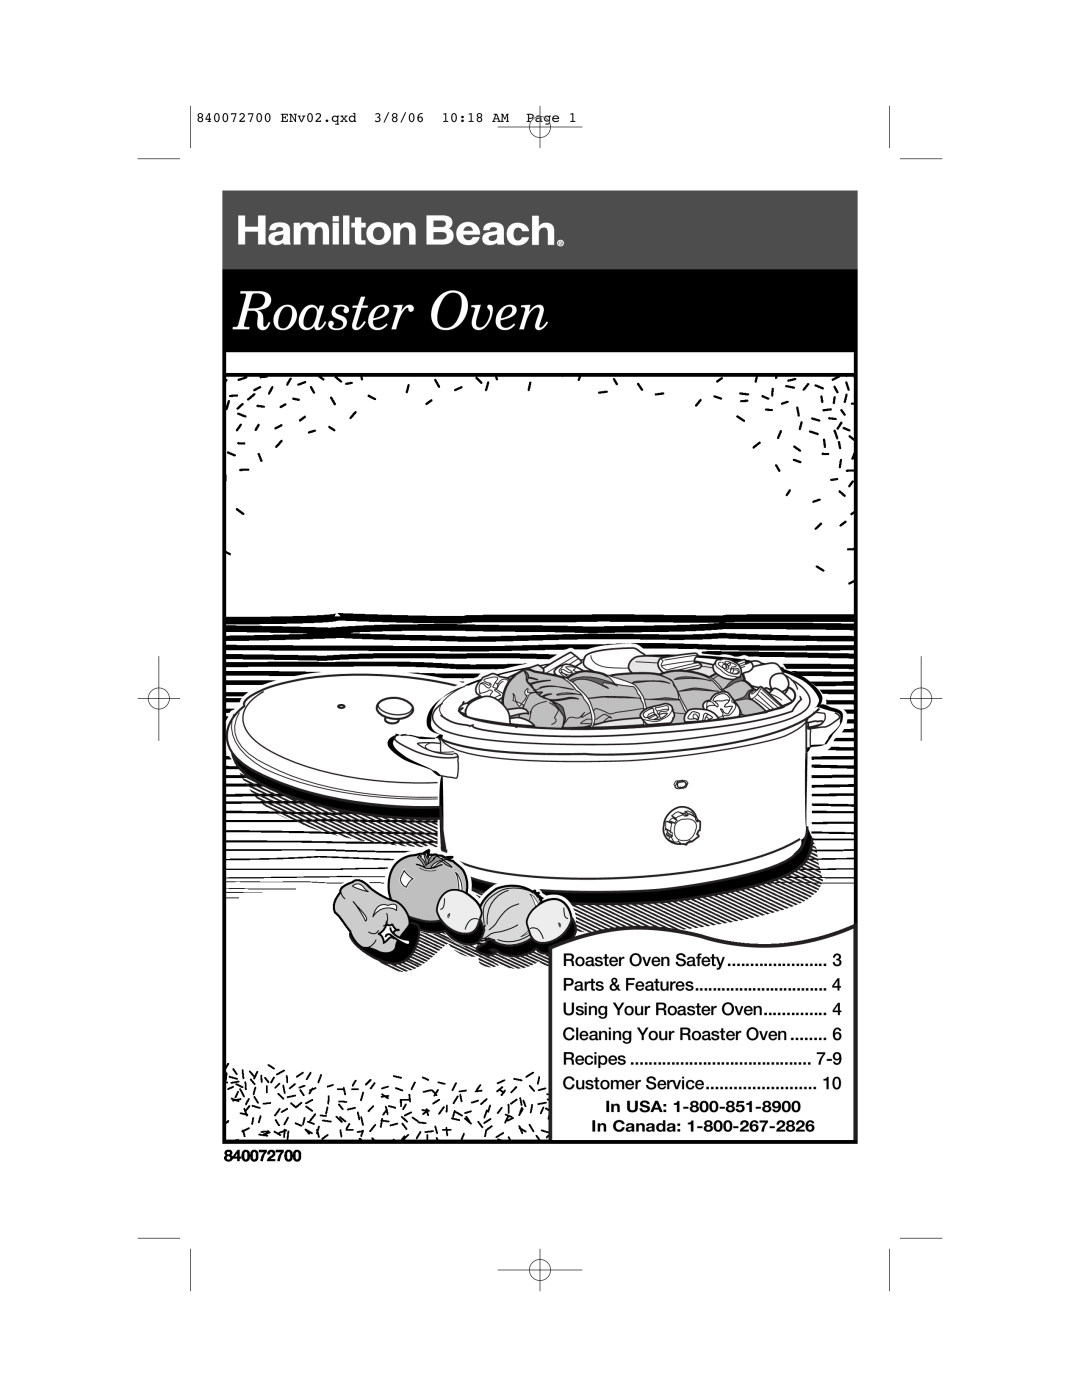 Hamilton Beach 32600s manual Roaster Oven Safety, Parts & Features, Using Your Roaster Oven, Recipes, Customer Service 